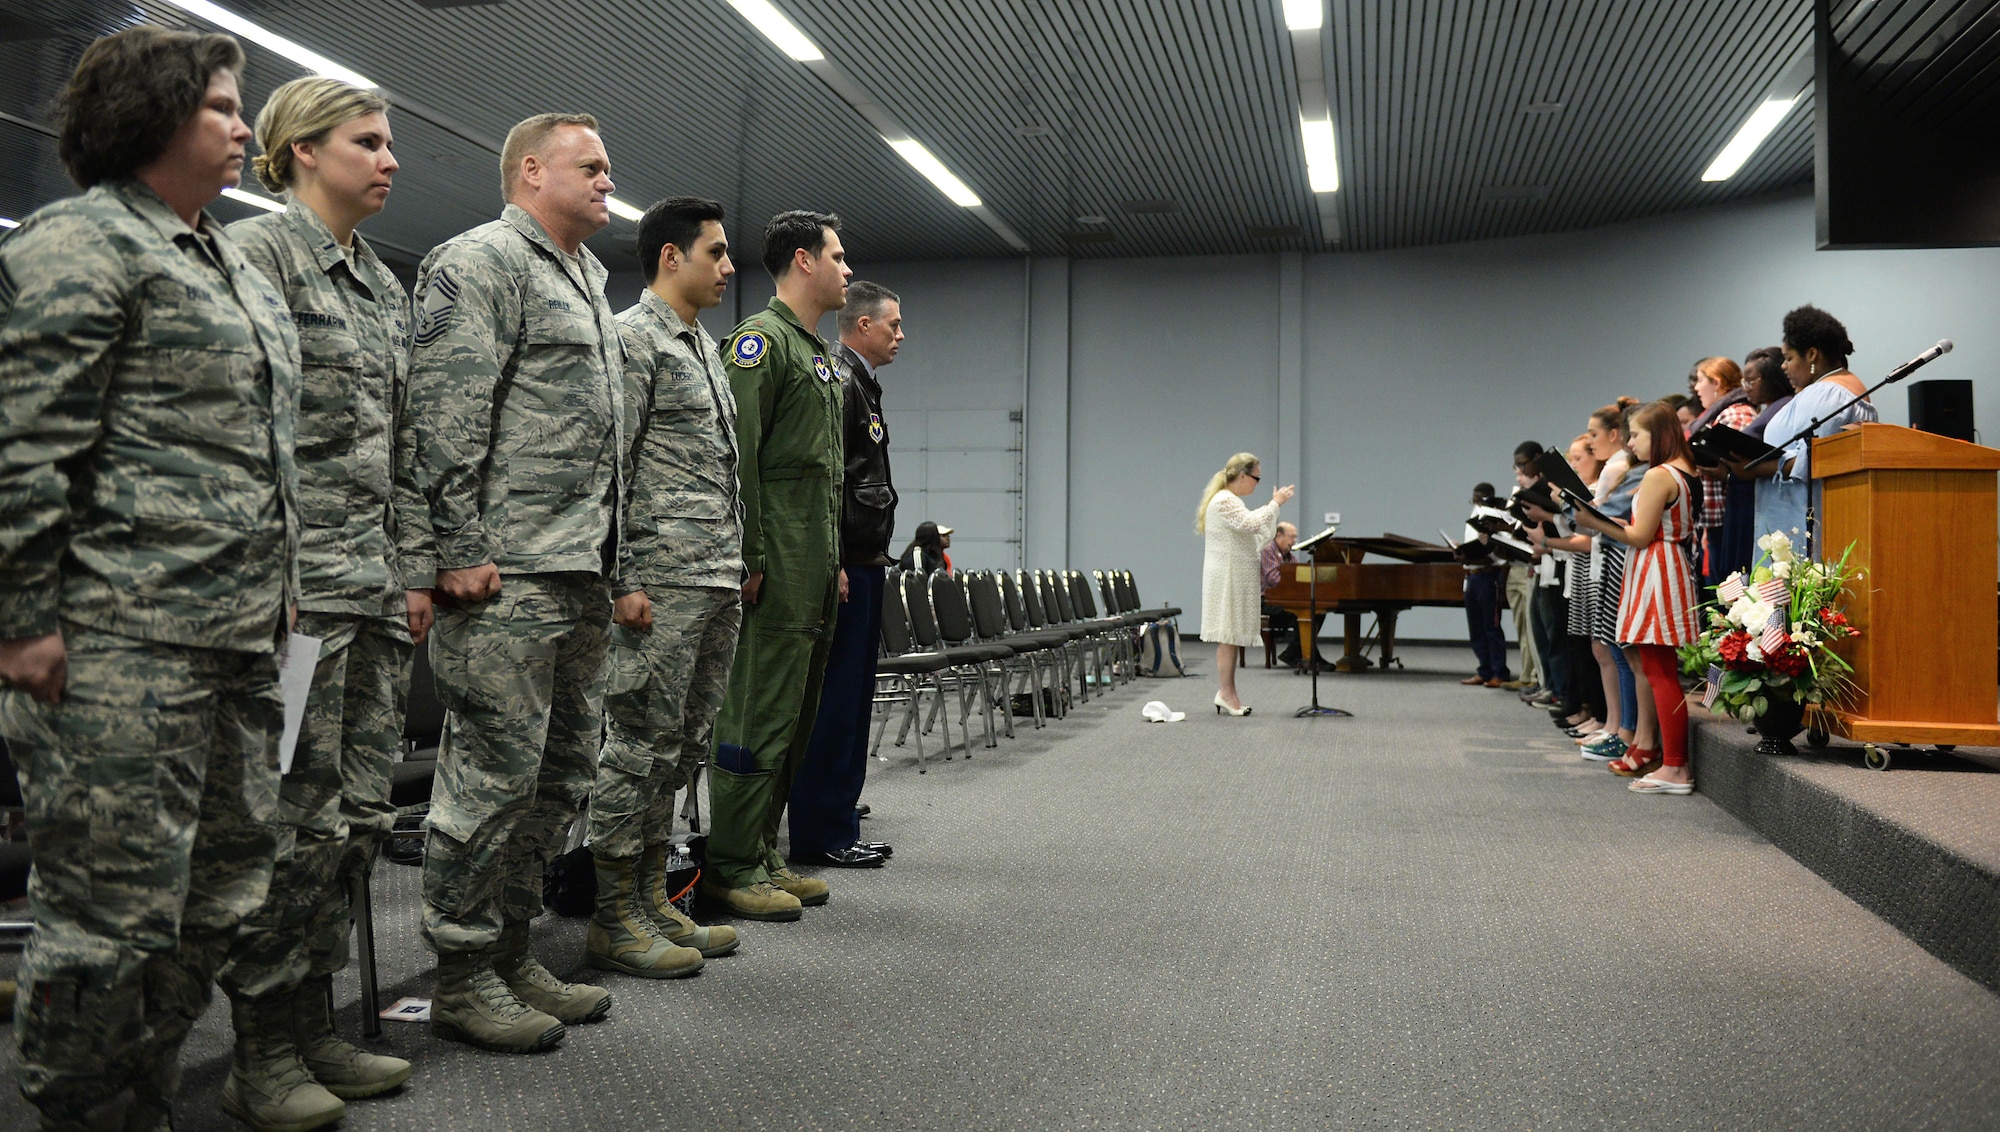 Airmen from Columbus Air Force Base, Mississippi, stand during the Air Force song Nov. 7, 2017, at the East Mississippi Community College campus in Mayhew, Mississippi. The choir sang before Col. Douglas Gosney, 14th Flying Training Wing Commander, spoke at the ‘Proud to be an American’ event. (U.S. Air Force photo by Airman 1st Class Keith Holcomb)